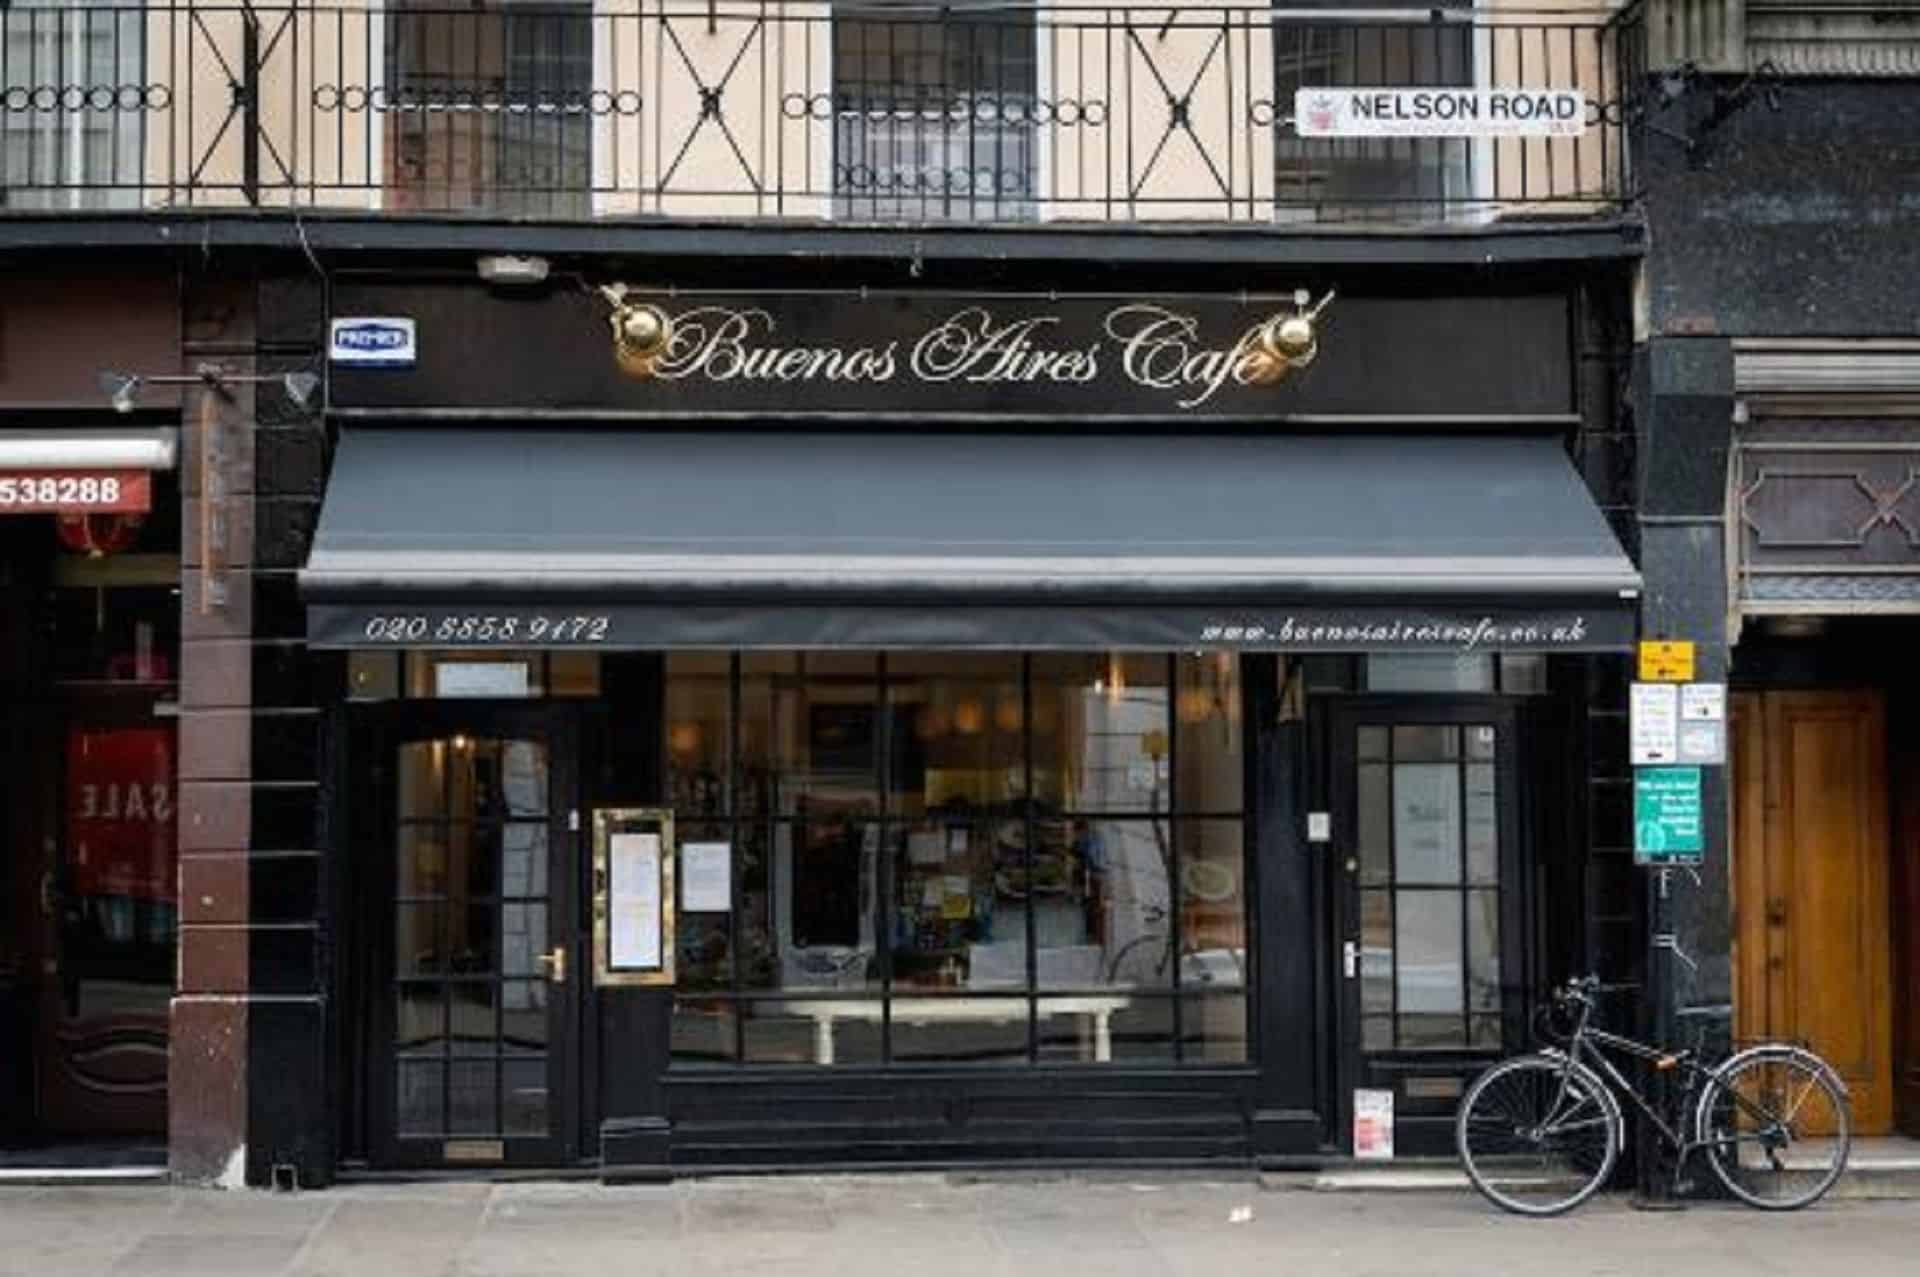 Buenos Aires Cafe in UK